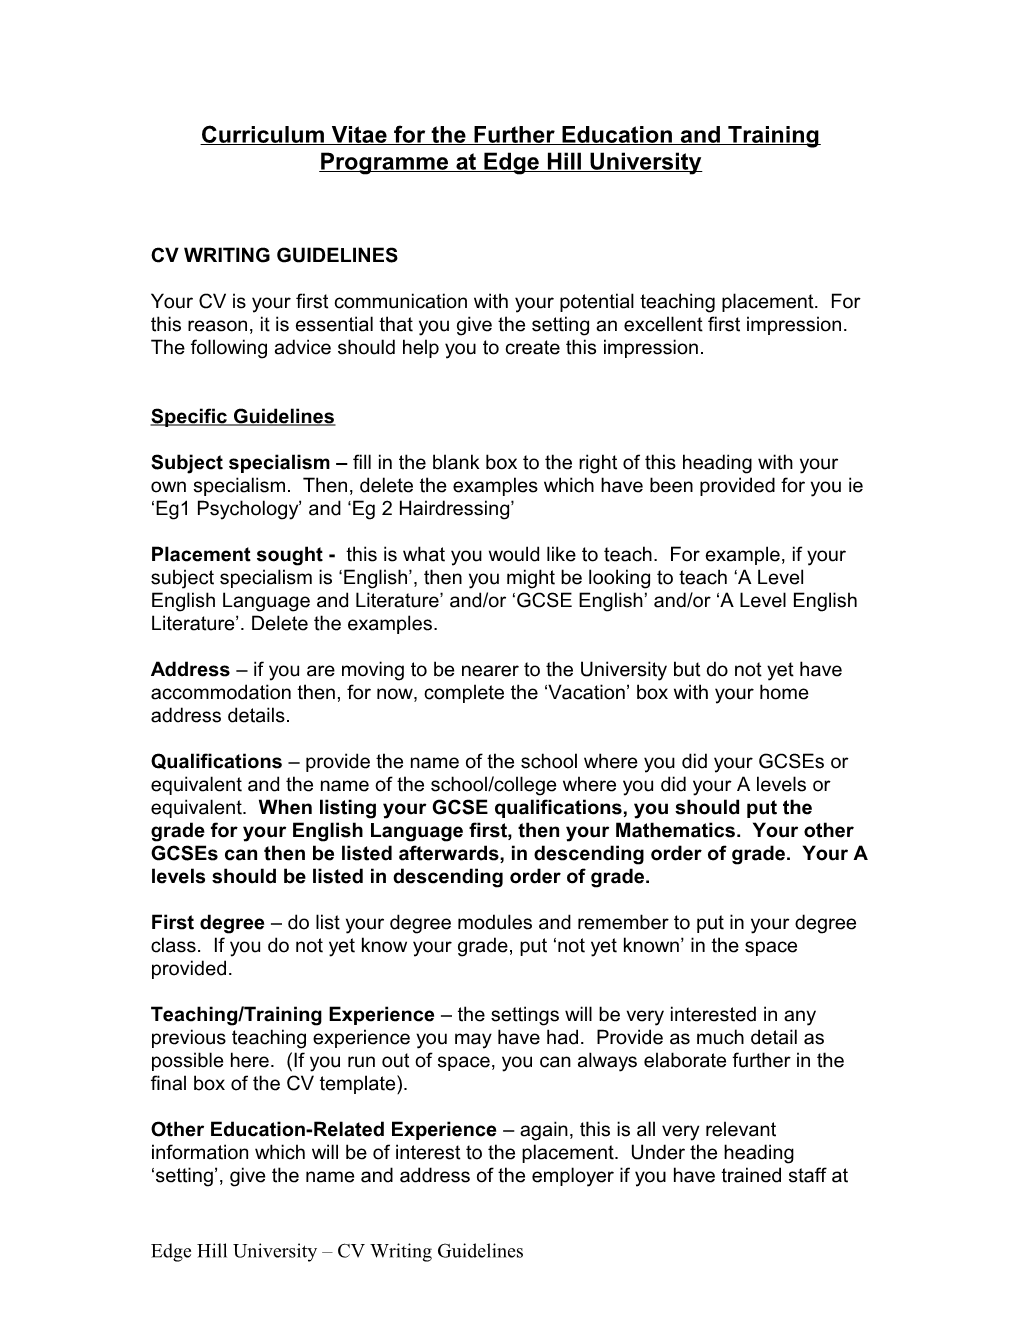 Curriculum Vitae for the PCET Programme at Edge Hill University